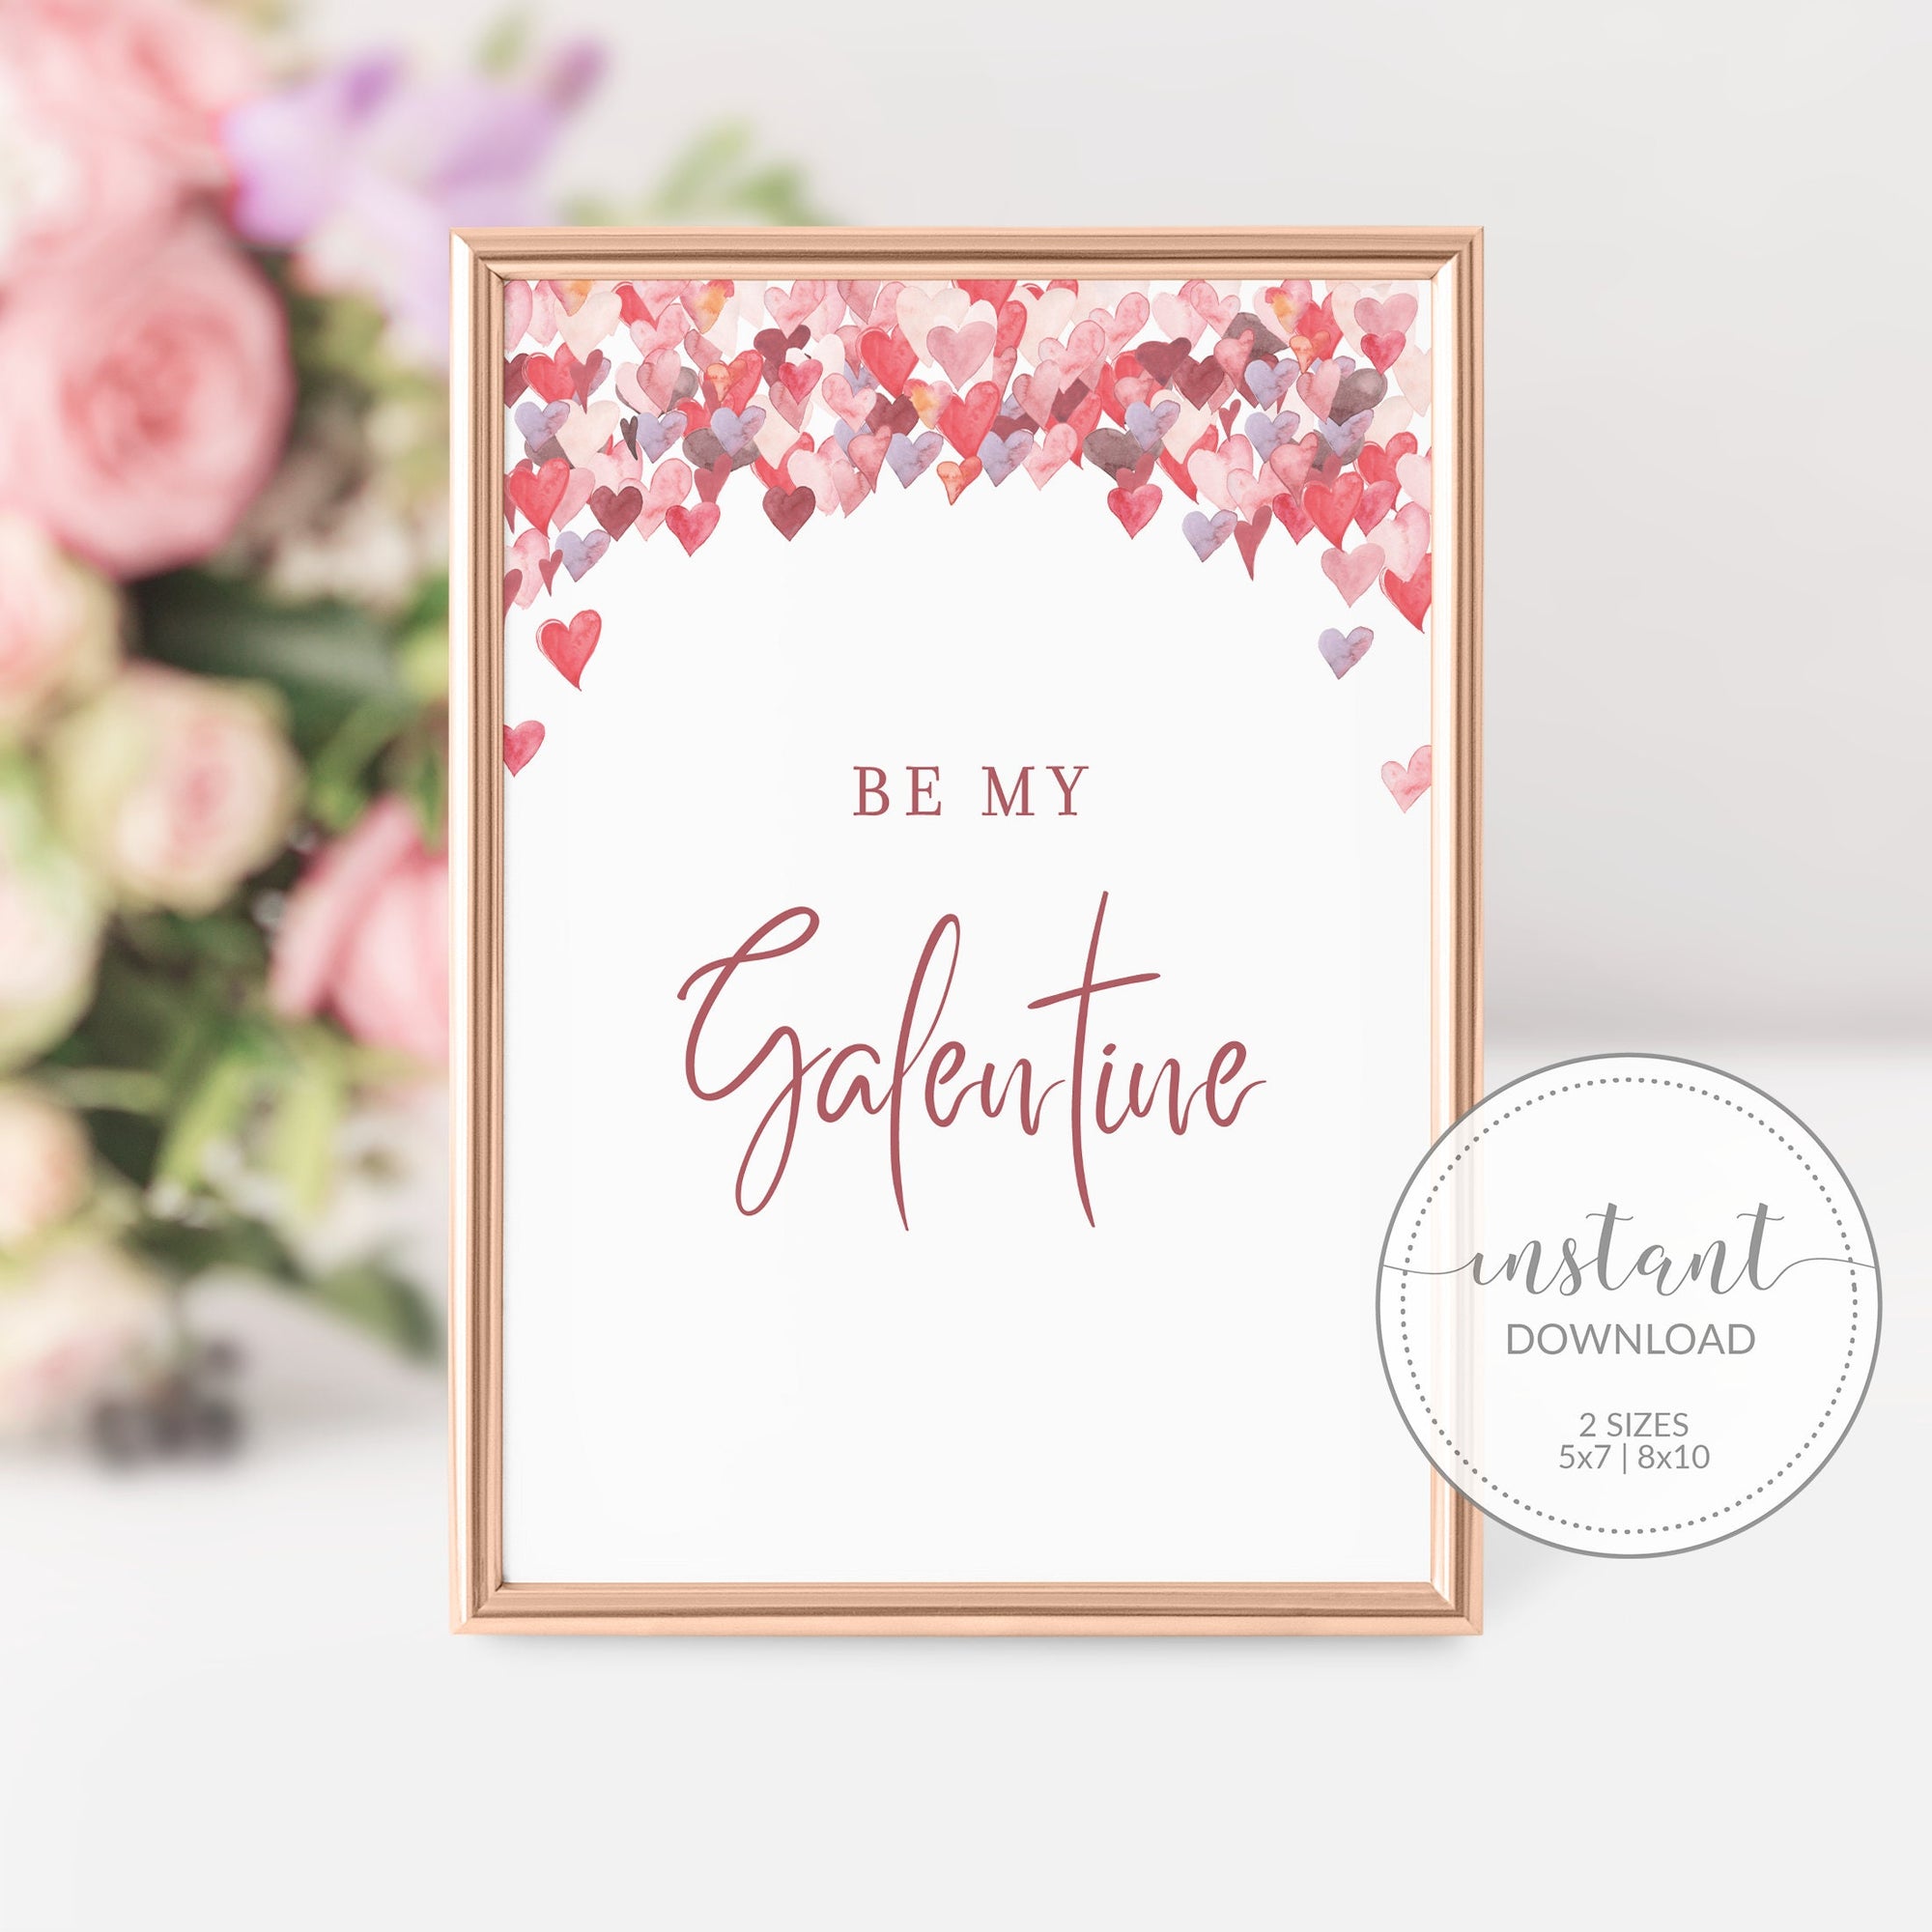 Be My Galentine Sign Printable, Galentines Day Decor, Galentines Day Party Decorations, Galentines Party Sign, INSTANT DOWNLOAD - VH100